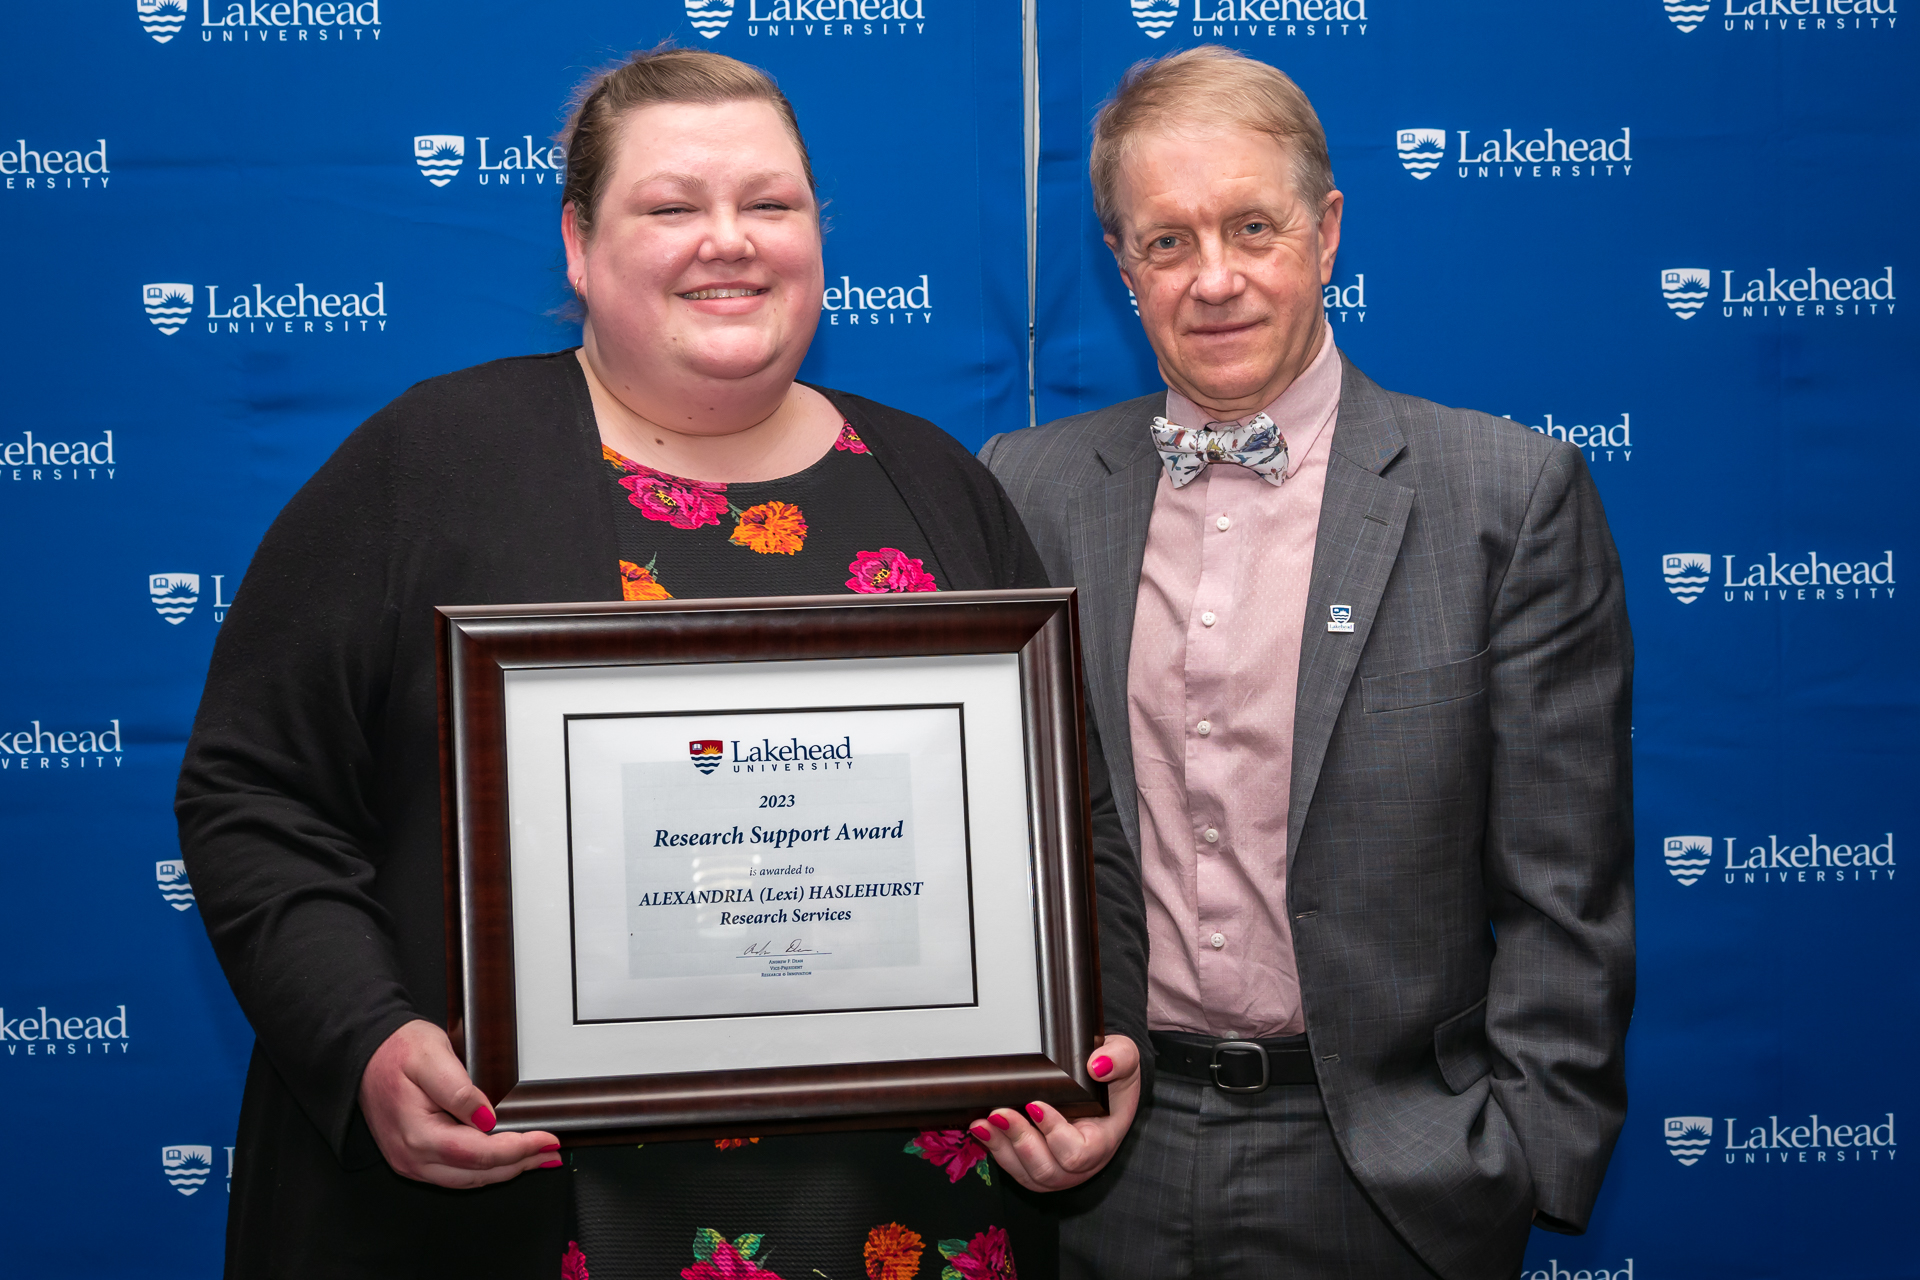 Photo of Winner of Research Support Award, Dr. Alexandria (Lexi) Haslehurst, Office of Research Services, with Dr. Andrew P. Dean, Vice-President, Research and Innovation